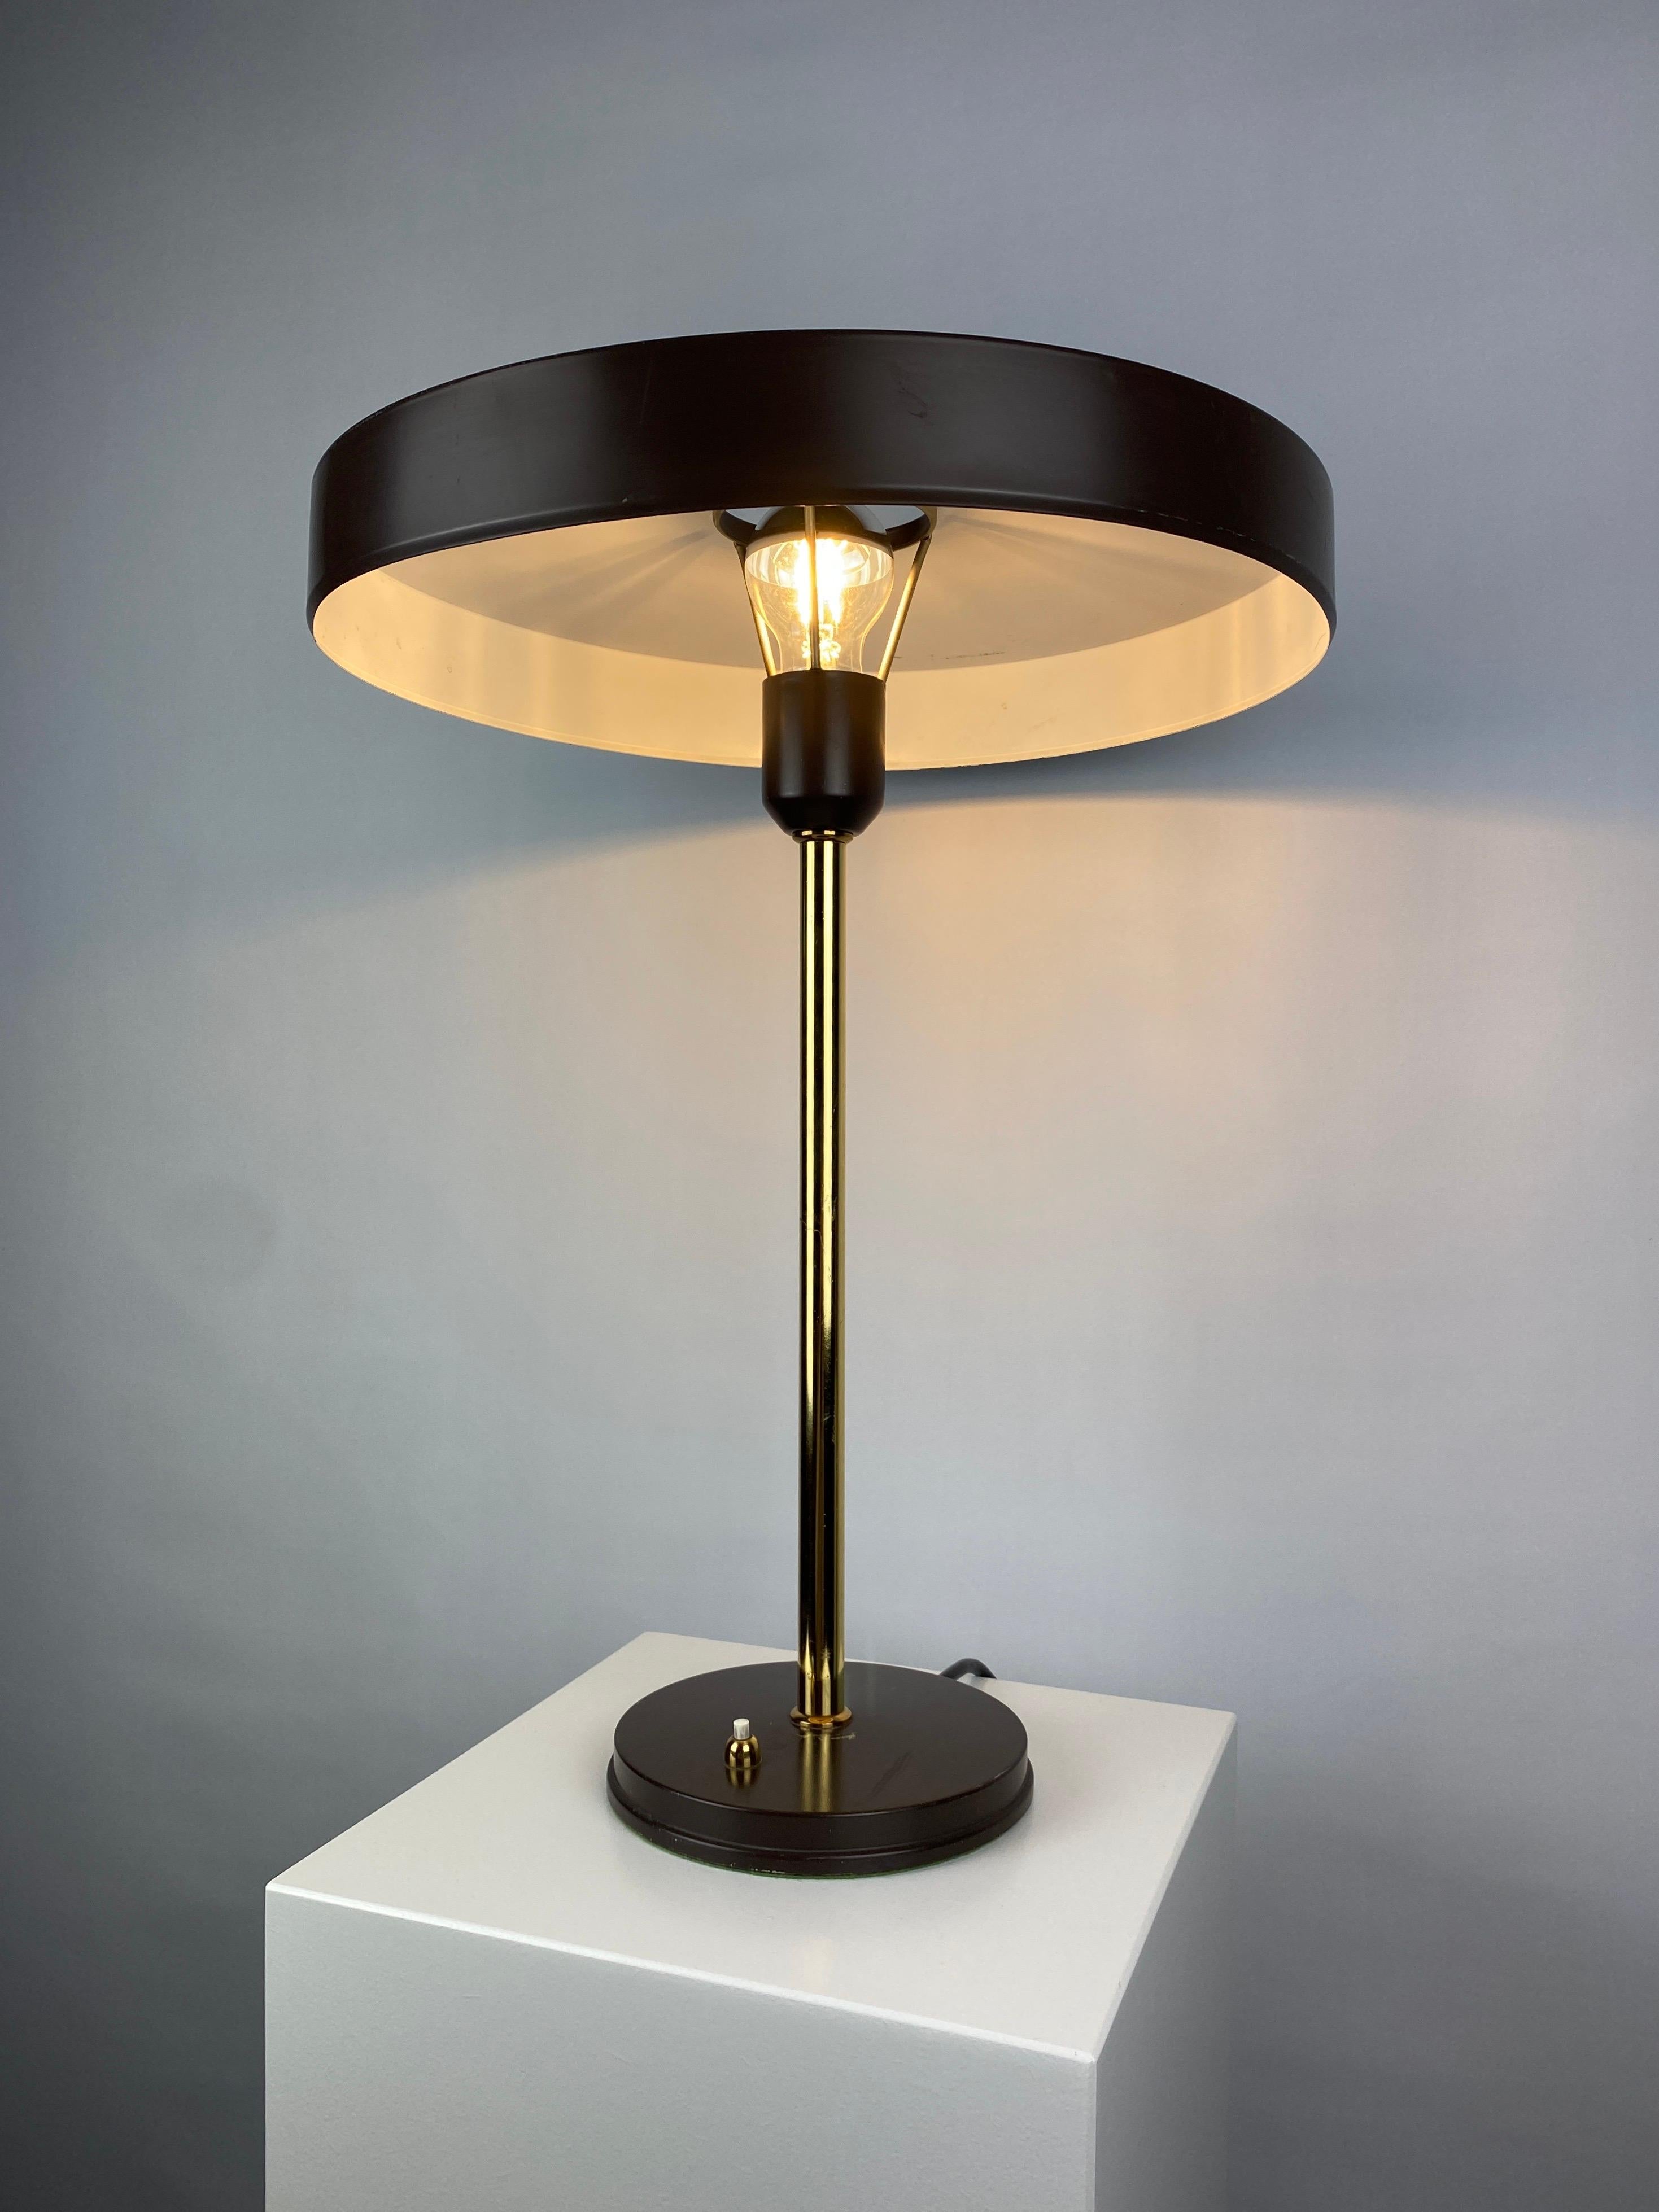 Great design by Louis Kalff for Philips called Timor 69 Desk Lamp. It is manufactured in 1970 - 1980. This version is in brown and gold, and has a UFO lampshade with a hole in the middle for ahead mirror lamp.

This great piece of design is from an